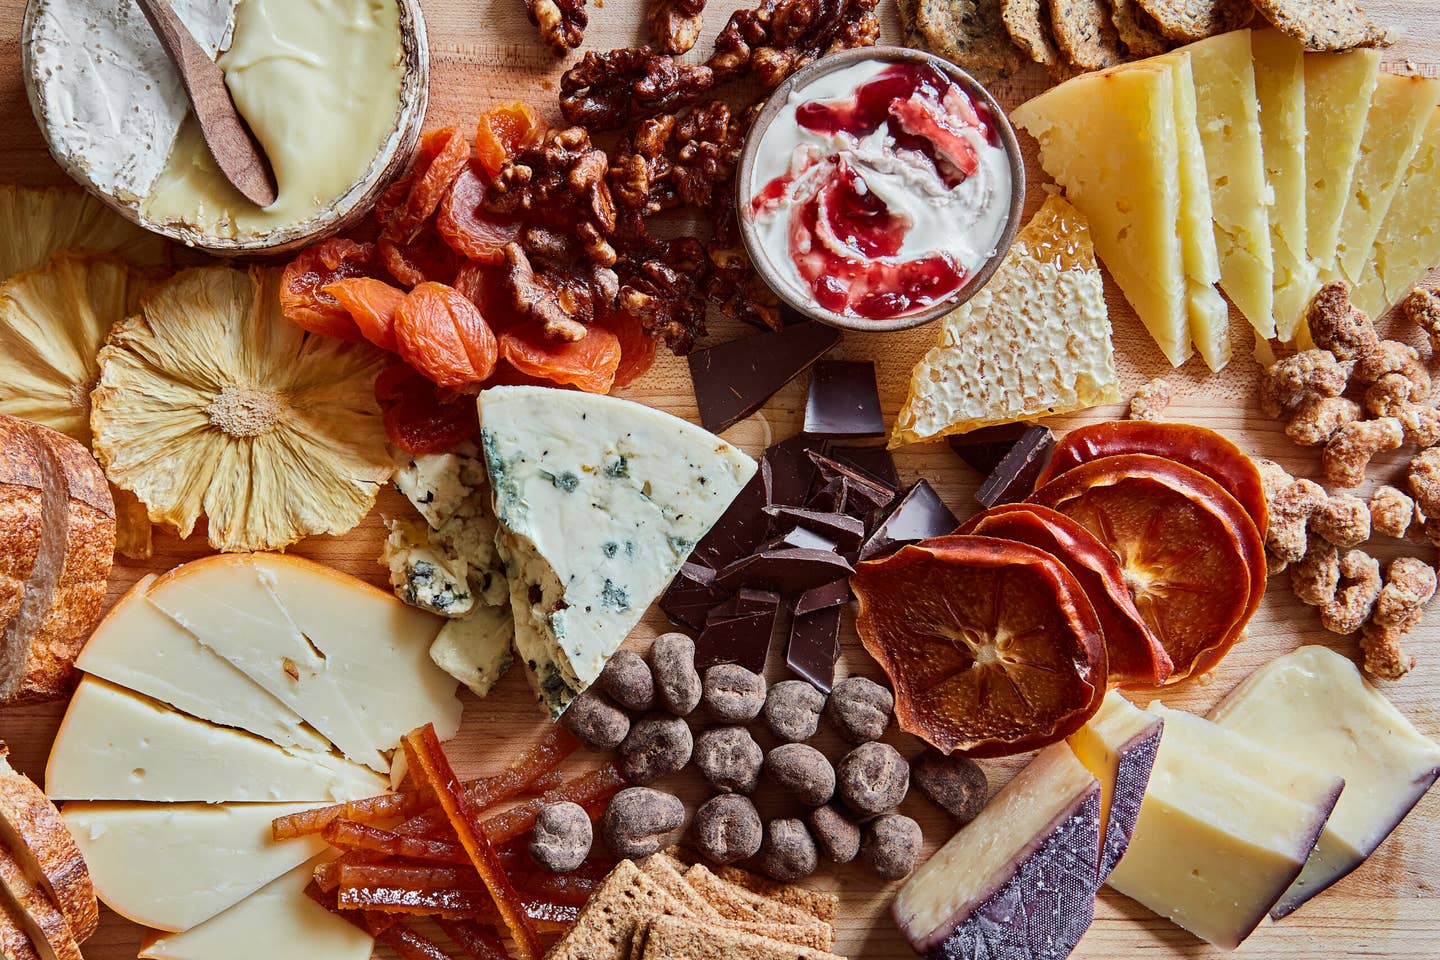 Wisconsin Cheese Boards Feature